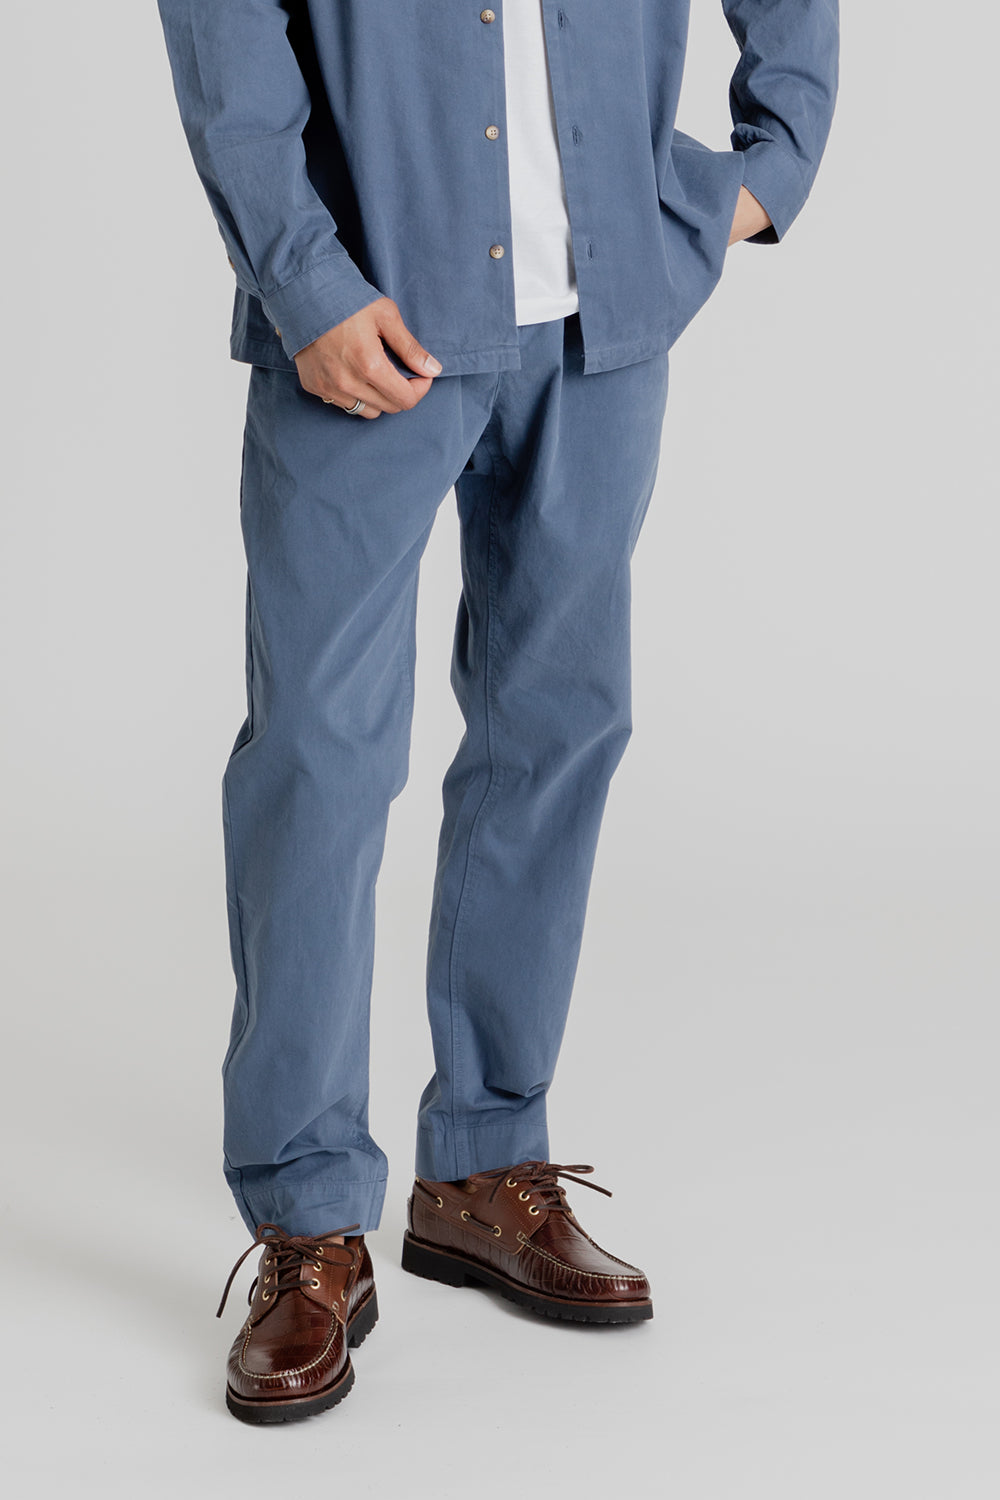 Kestin Inverness Twill Trouser in French Blue